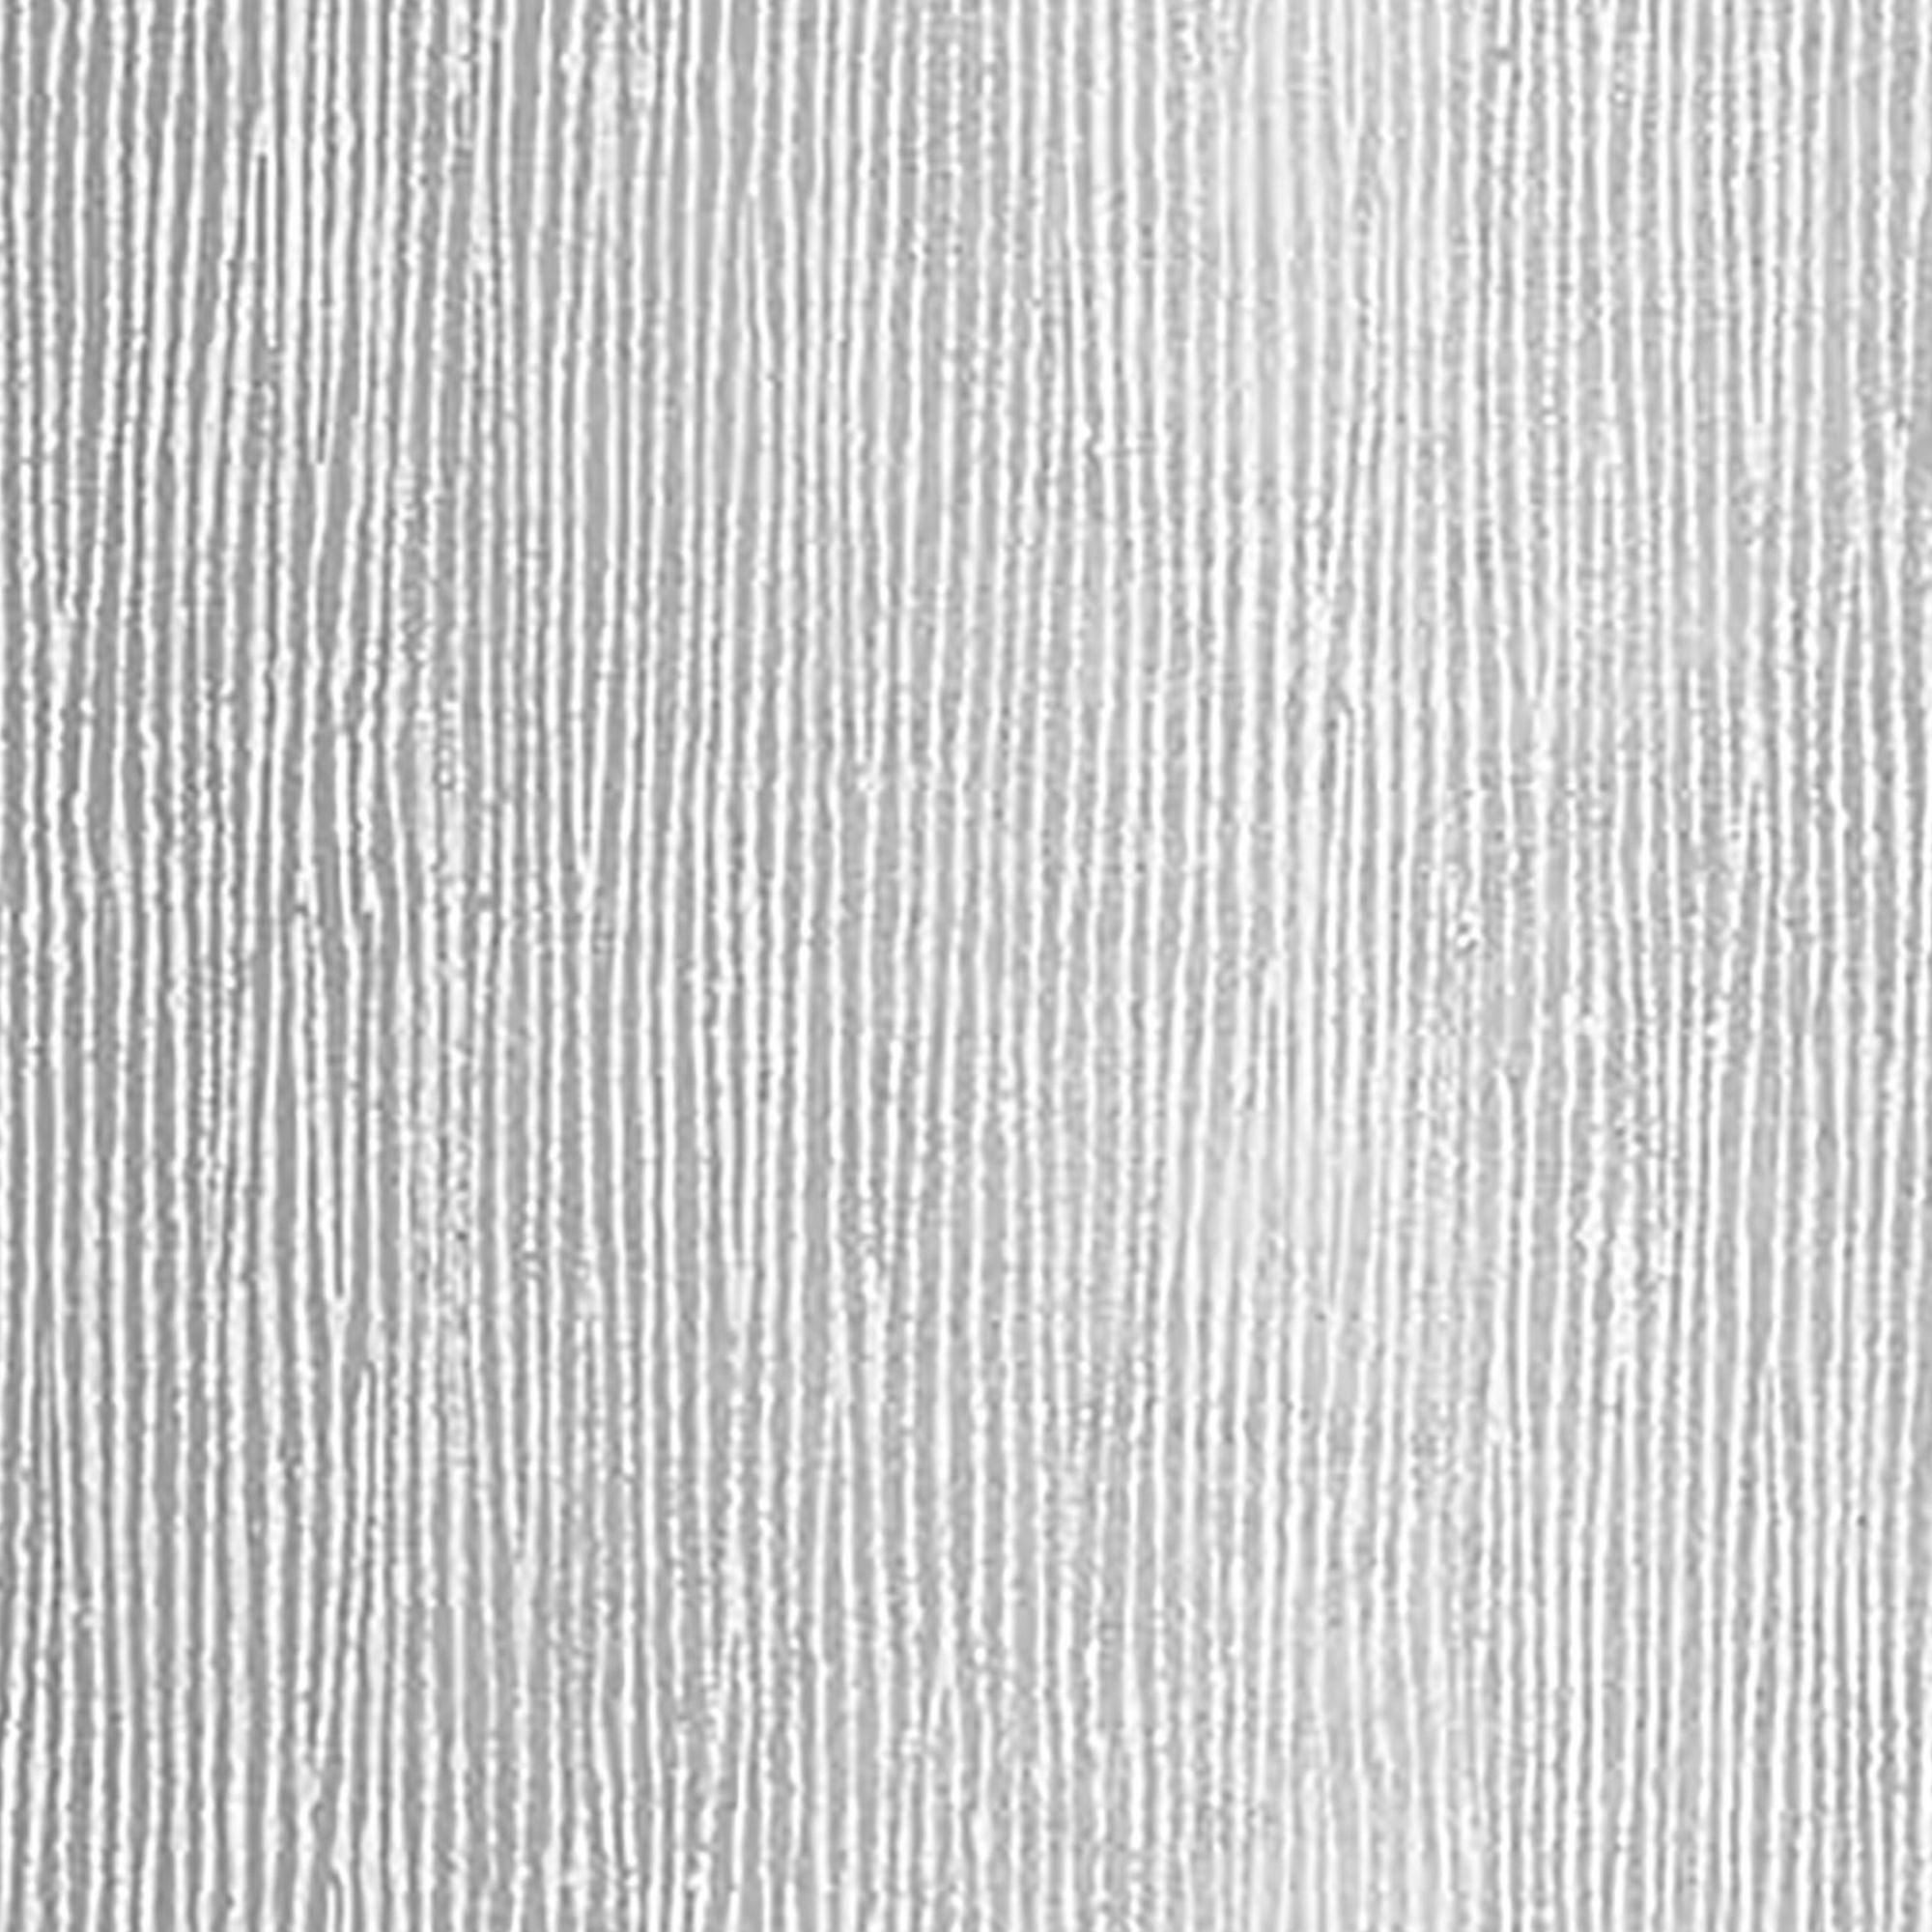 GoodHome Bloxholm Grey Silver effect Striped Textured Wallpaper